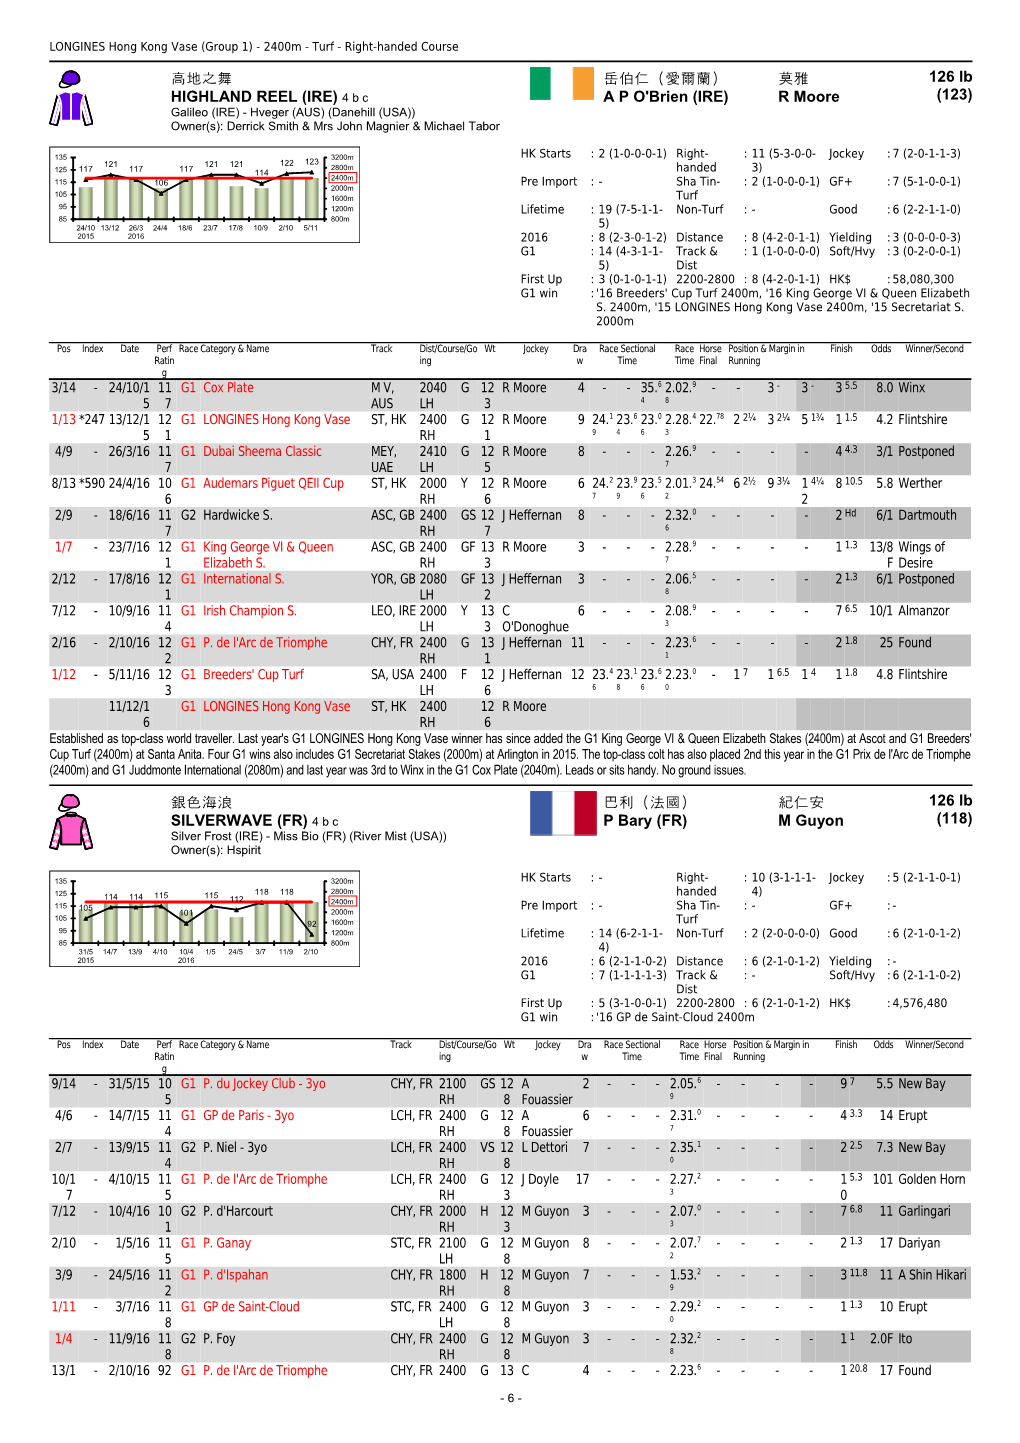 LONGINES Hong Kong Vase (Group 1) - 2400M - Turf - Right-Handed Course